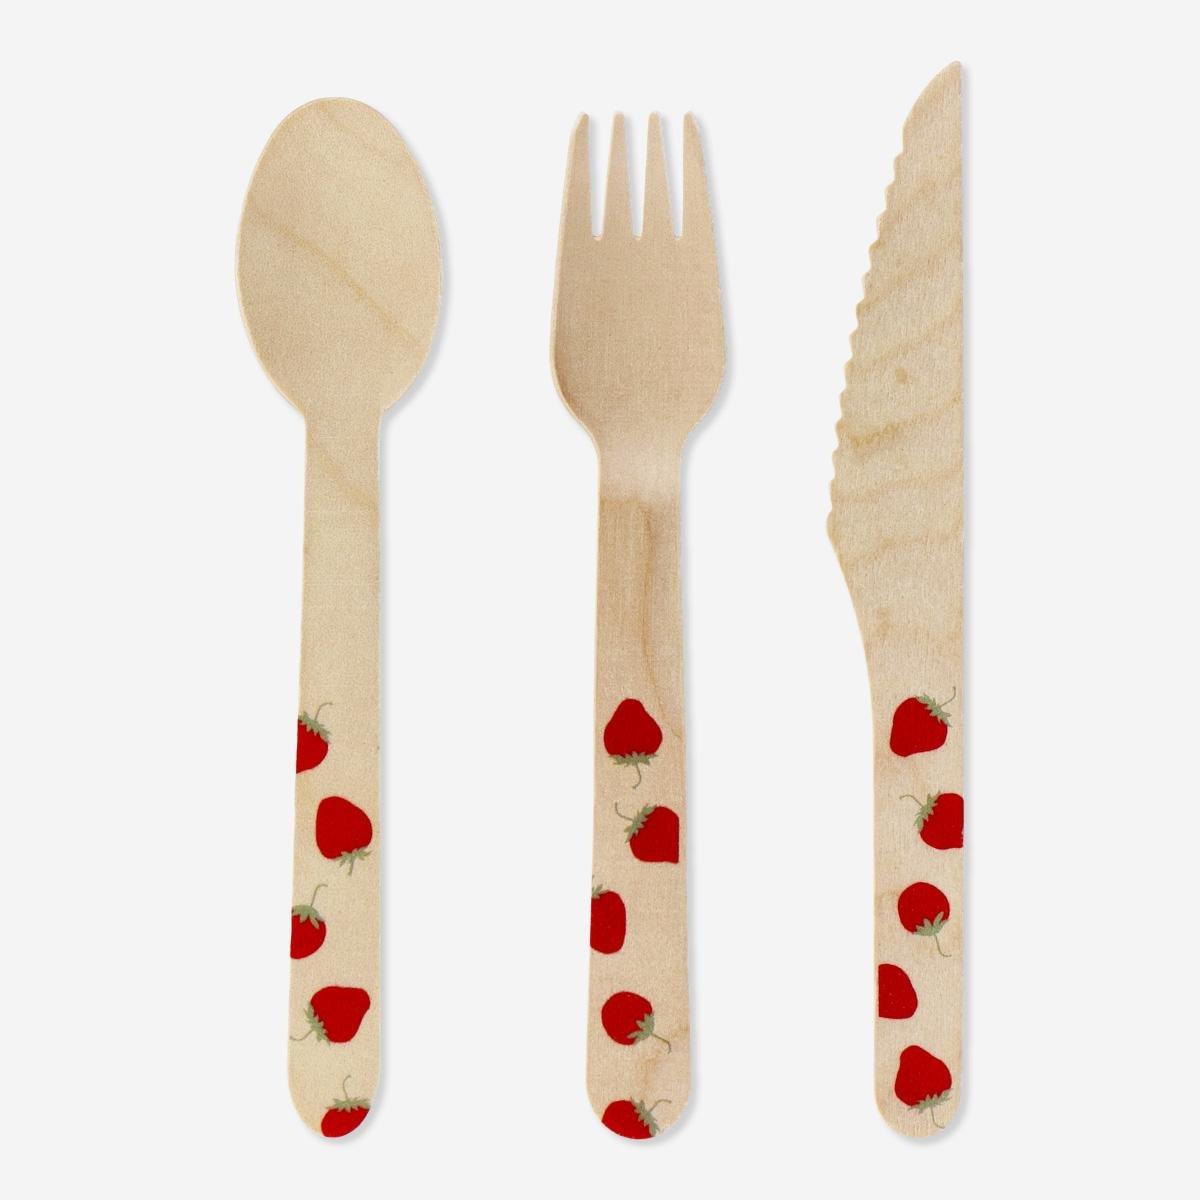 Multicolour wooden cutlery for 4 people